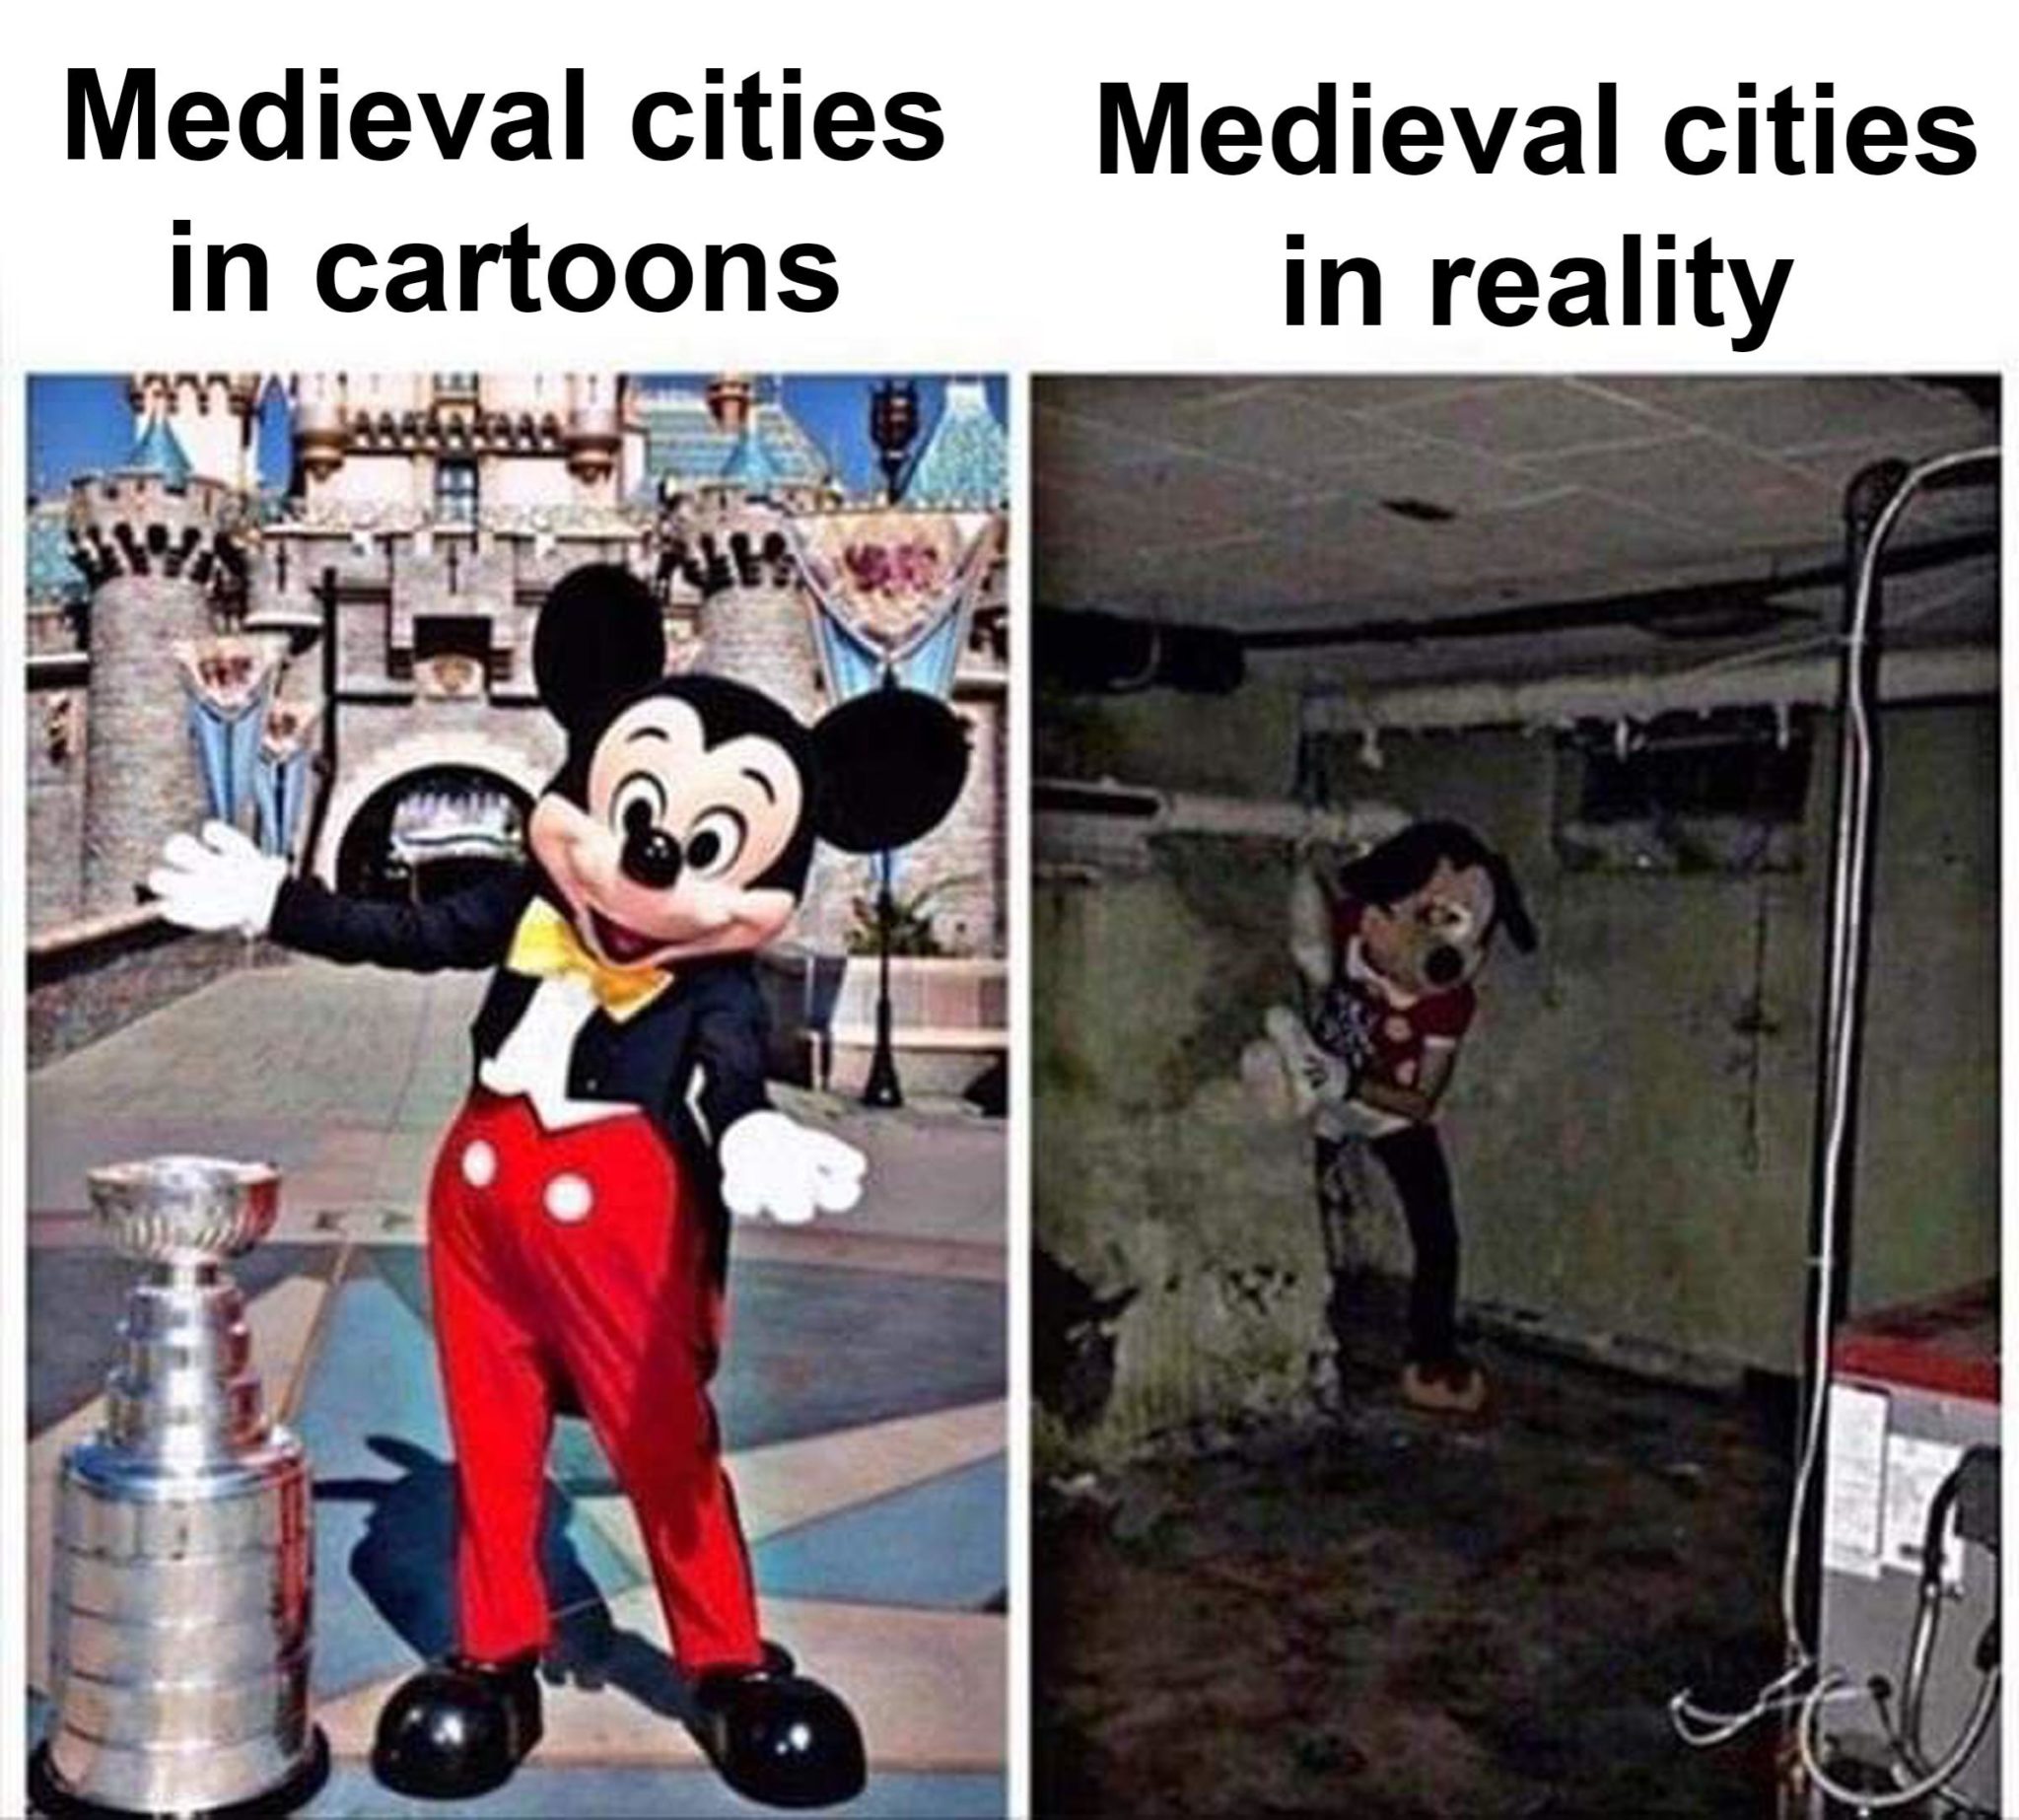 dank history memes - history memes - Medieval cities in cartoons Medieval cities in reality